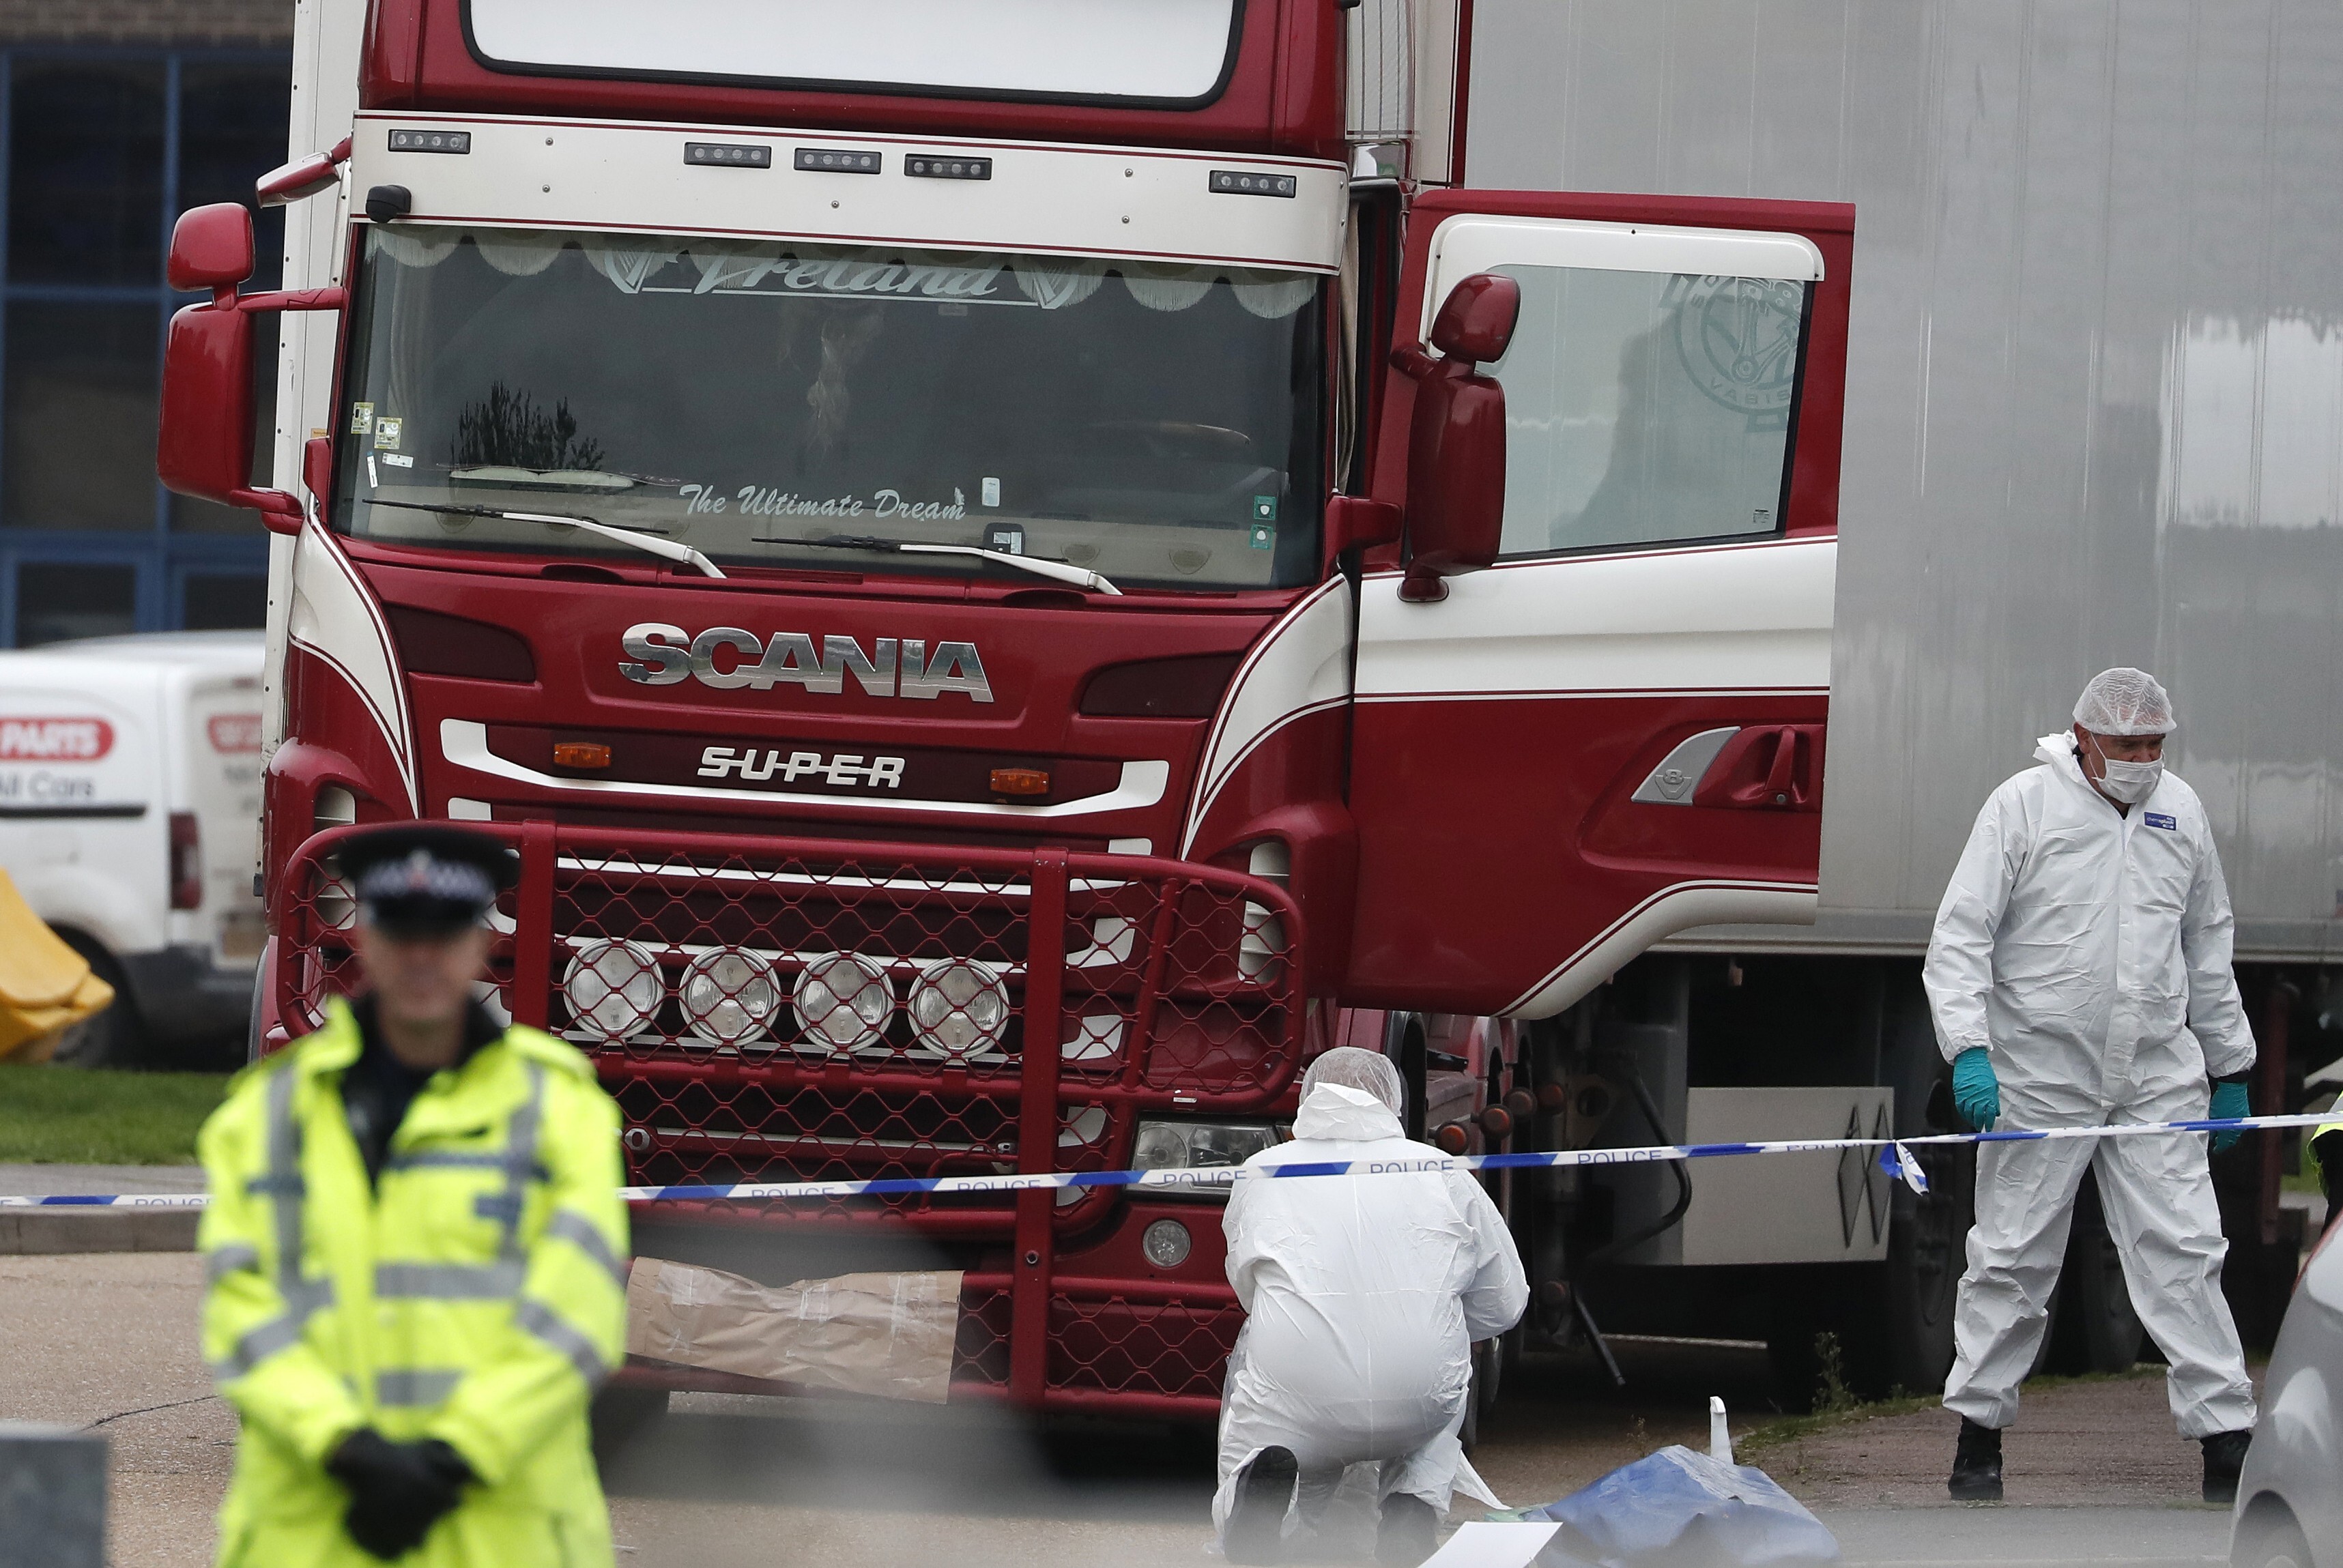 The 39 victims “suffocated” in the back of the truck, a prosecutor said. File photo: AP